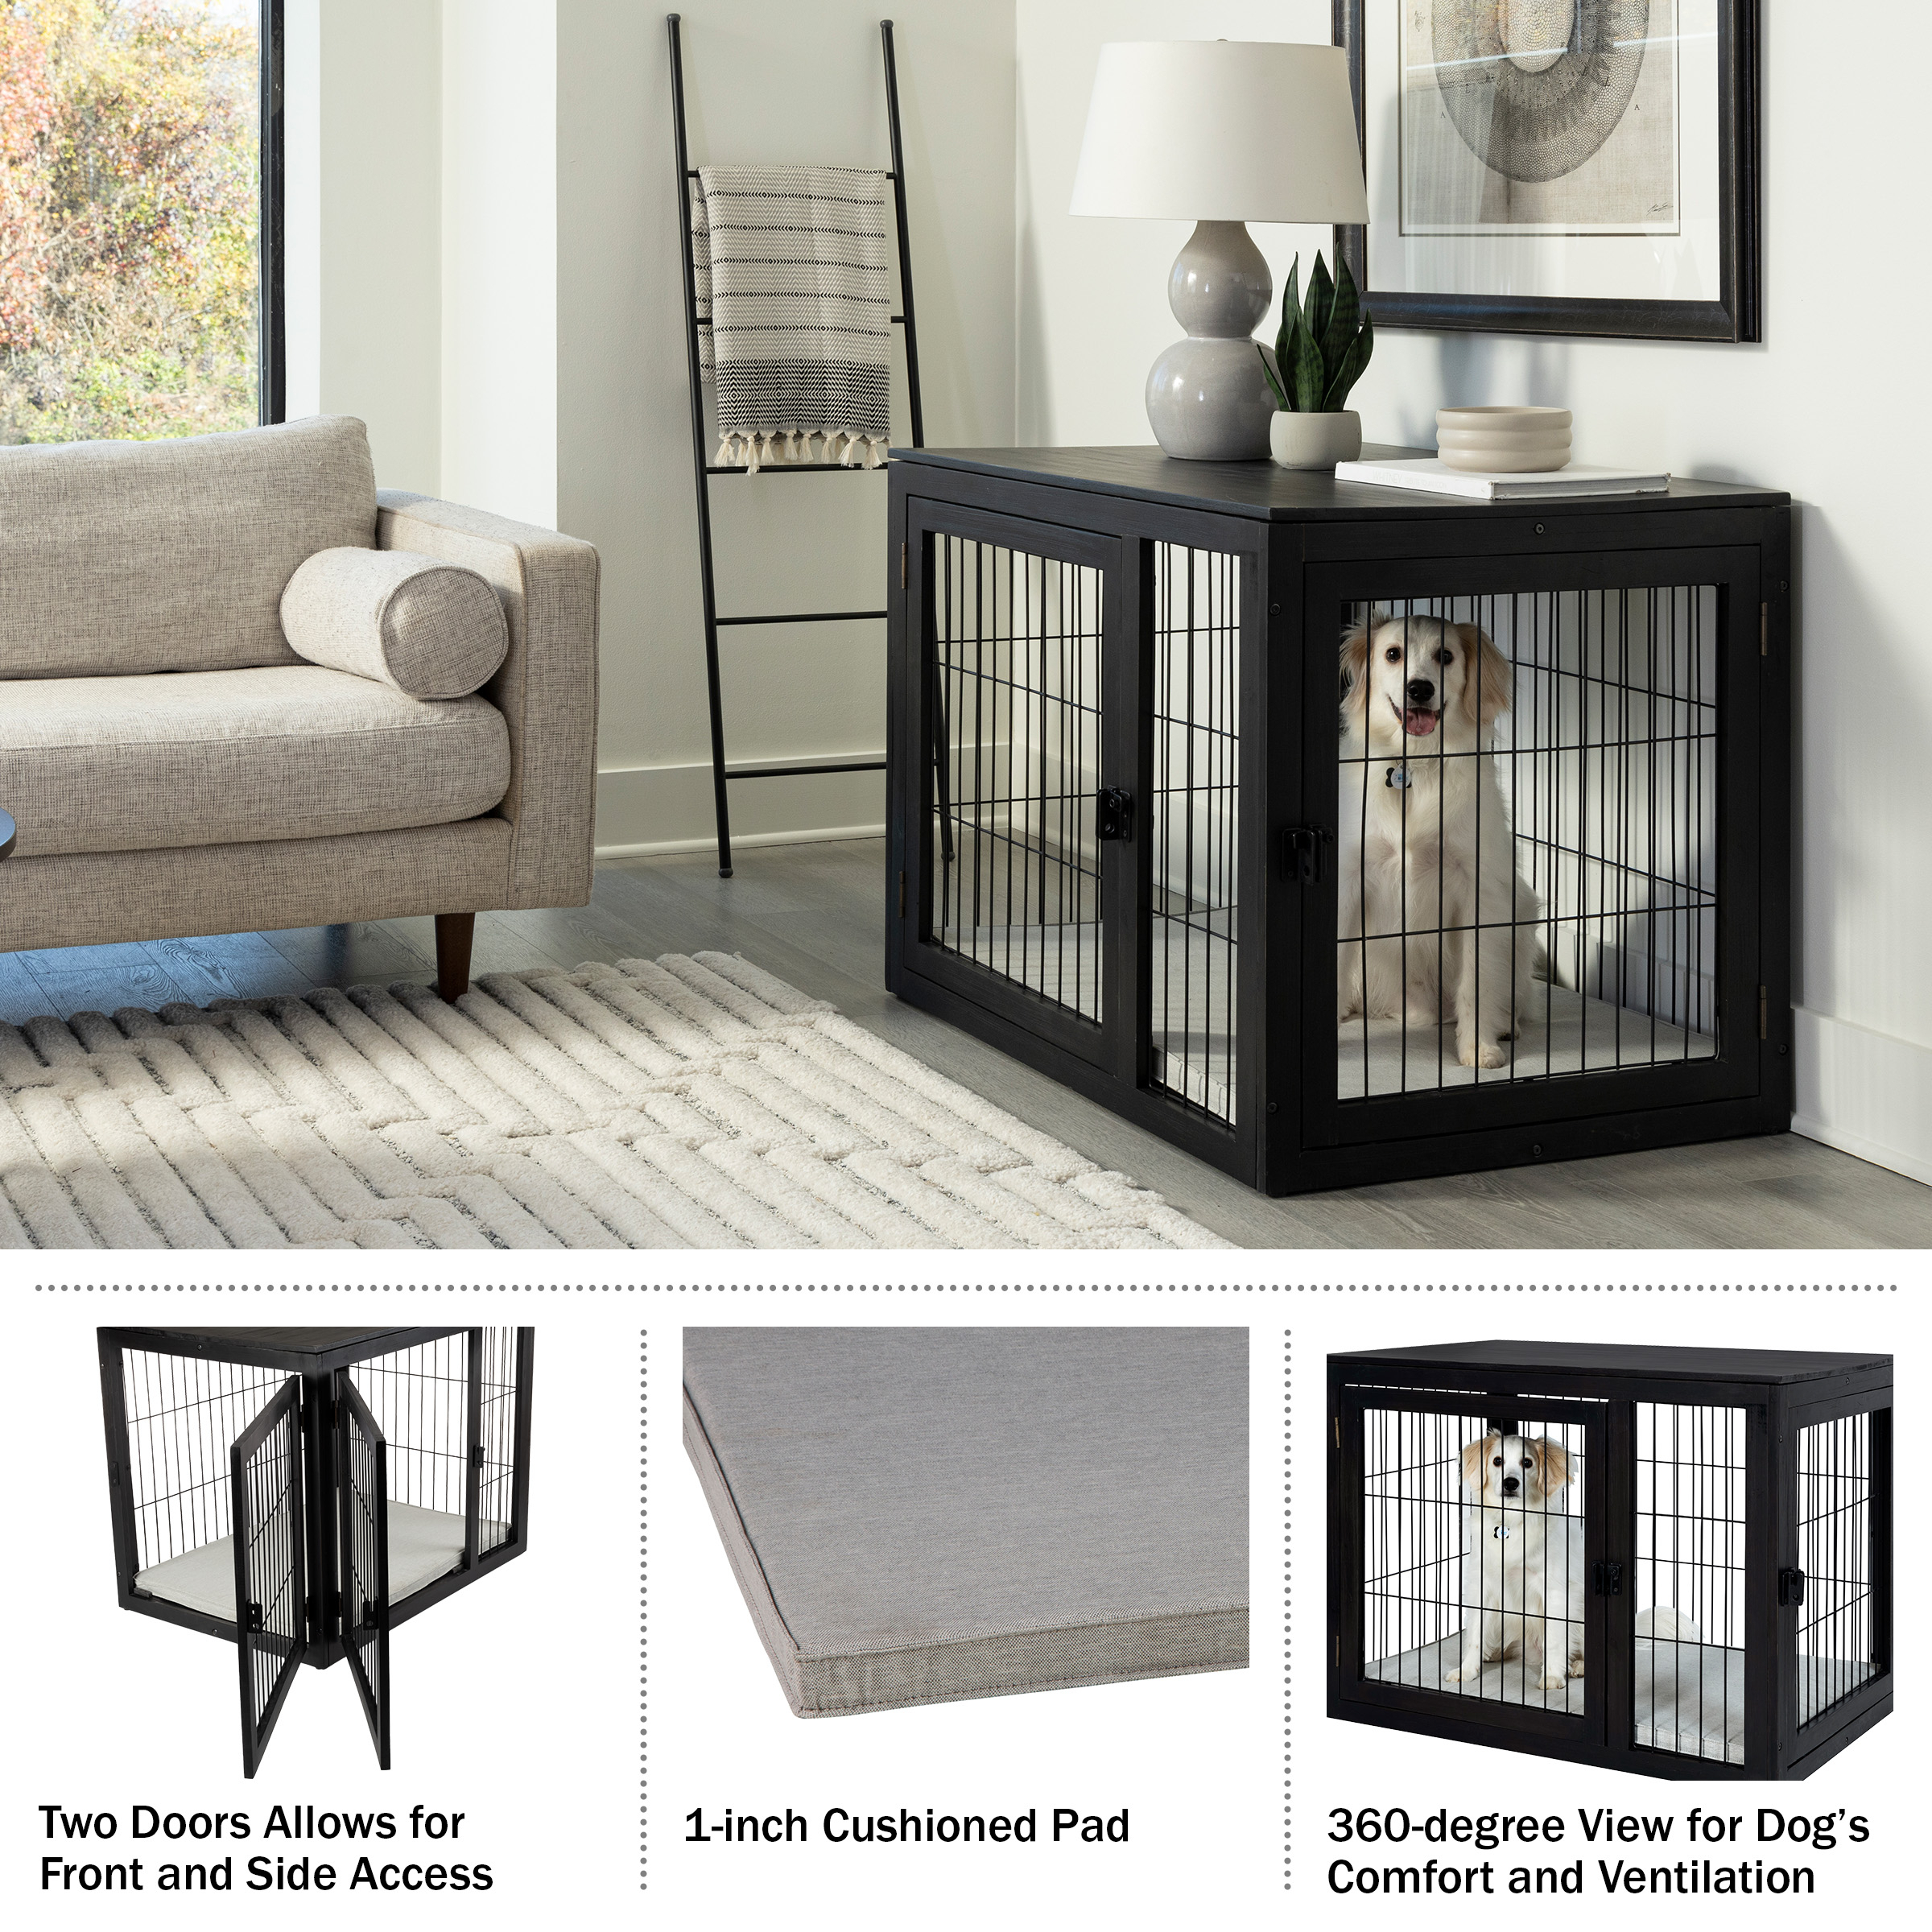 Furniture-Style Dog Crate - Acacia Wood Kennel For Large Dogs With Double Doors And Cushion - Dog Kennel Furniture By PETMAKER (Black)